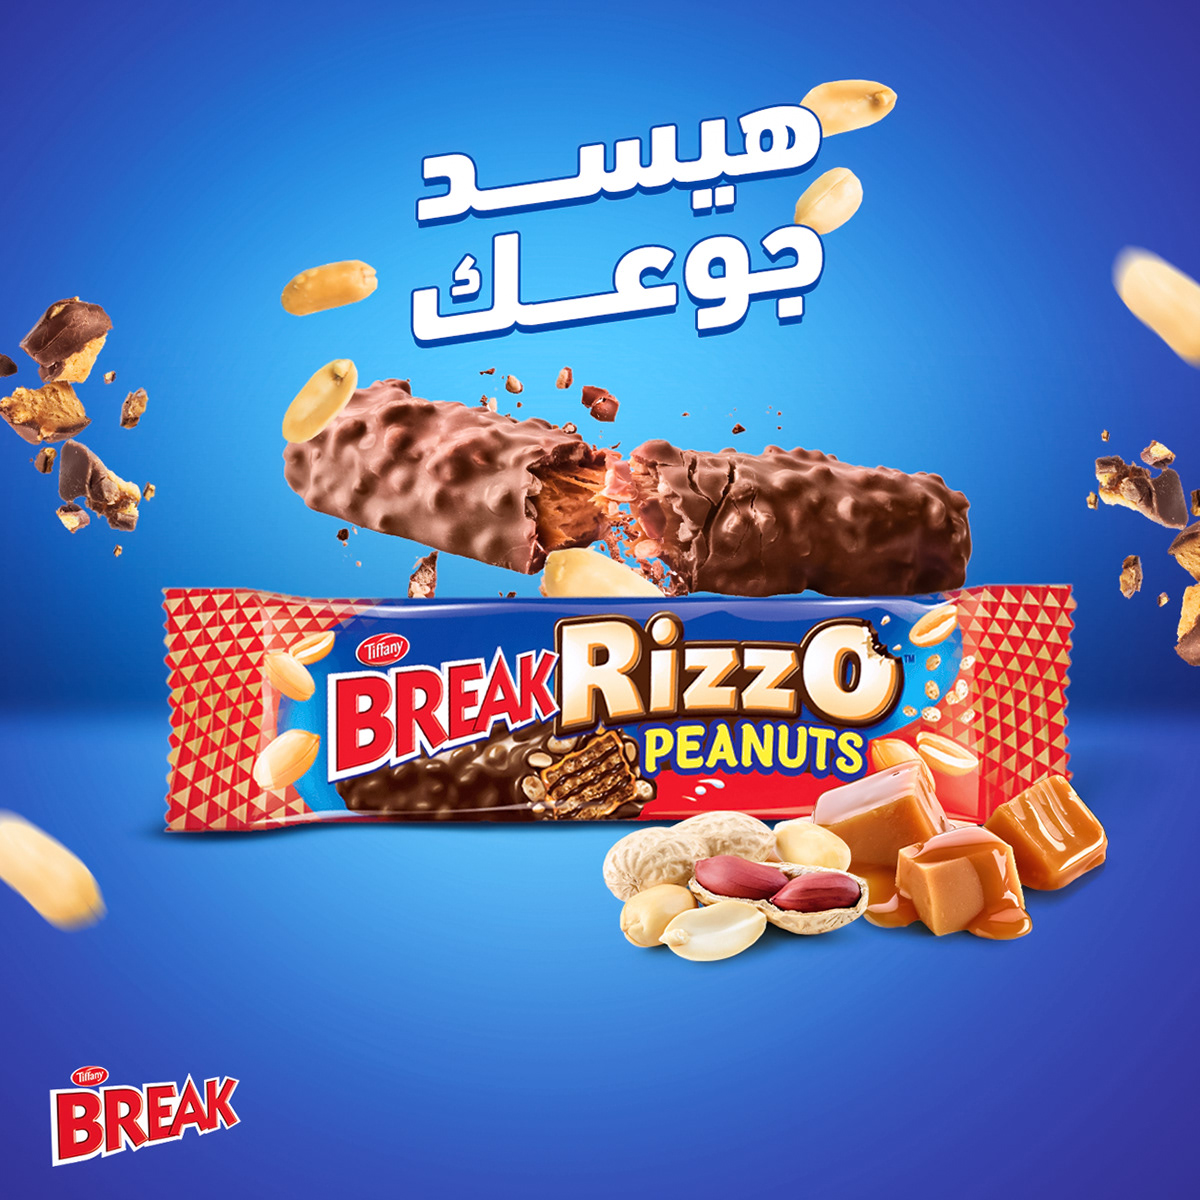 Advertising  ArtDirection biscuits caramel chocolate crunchy milk peanuts social media sweet